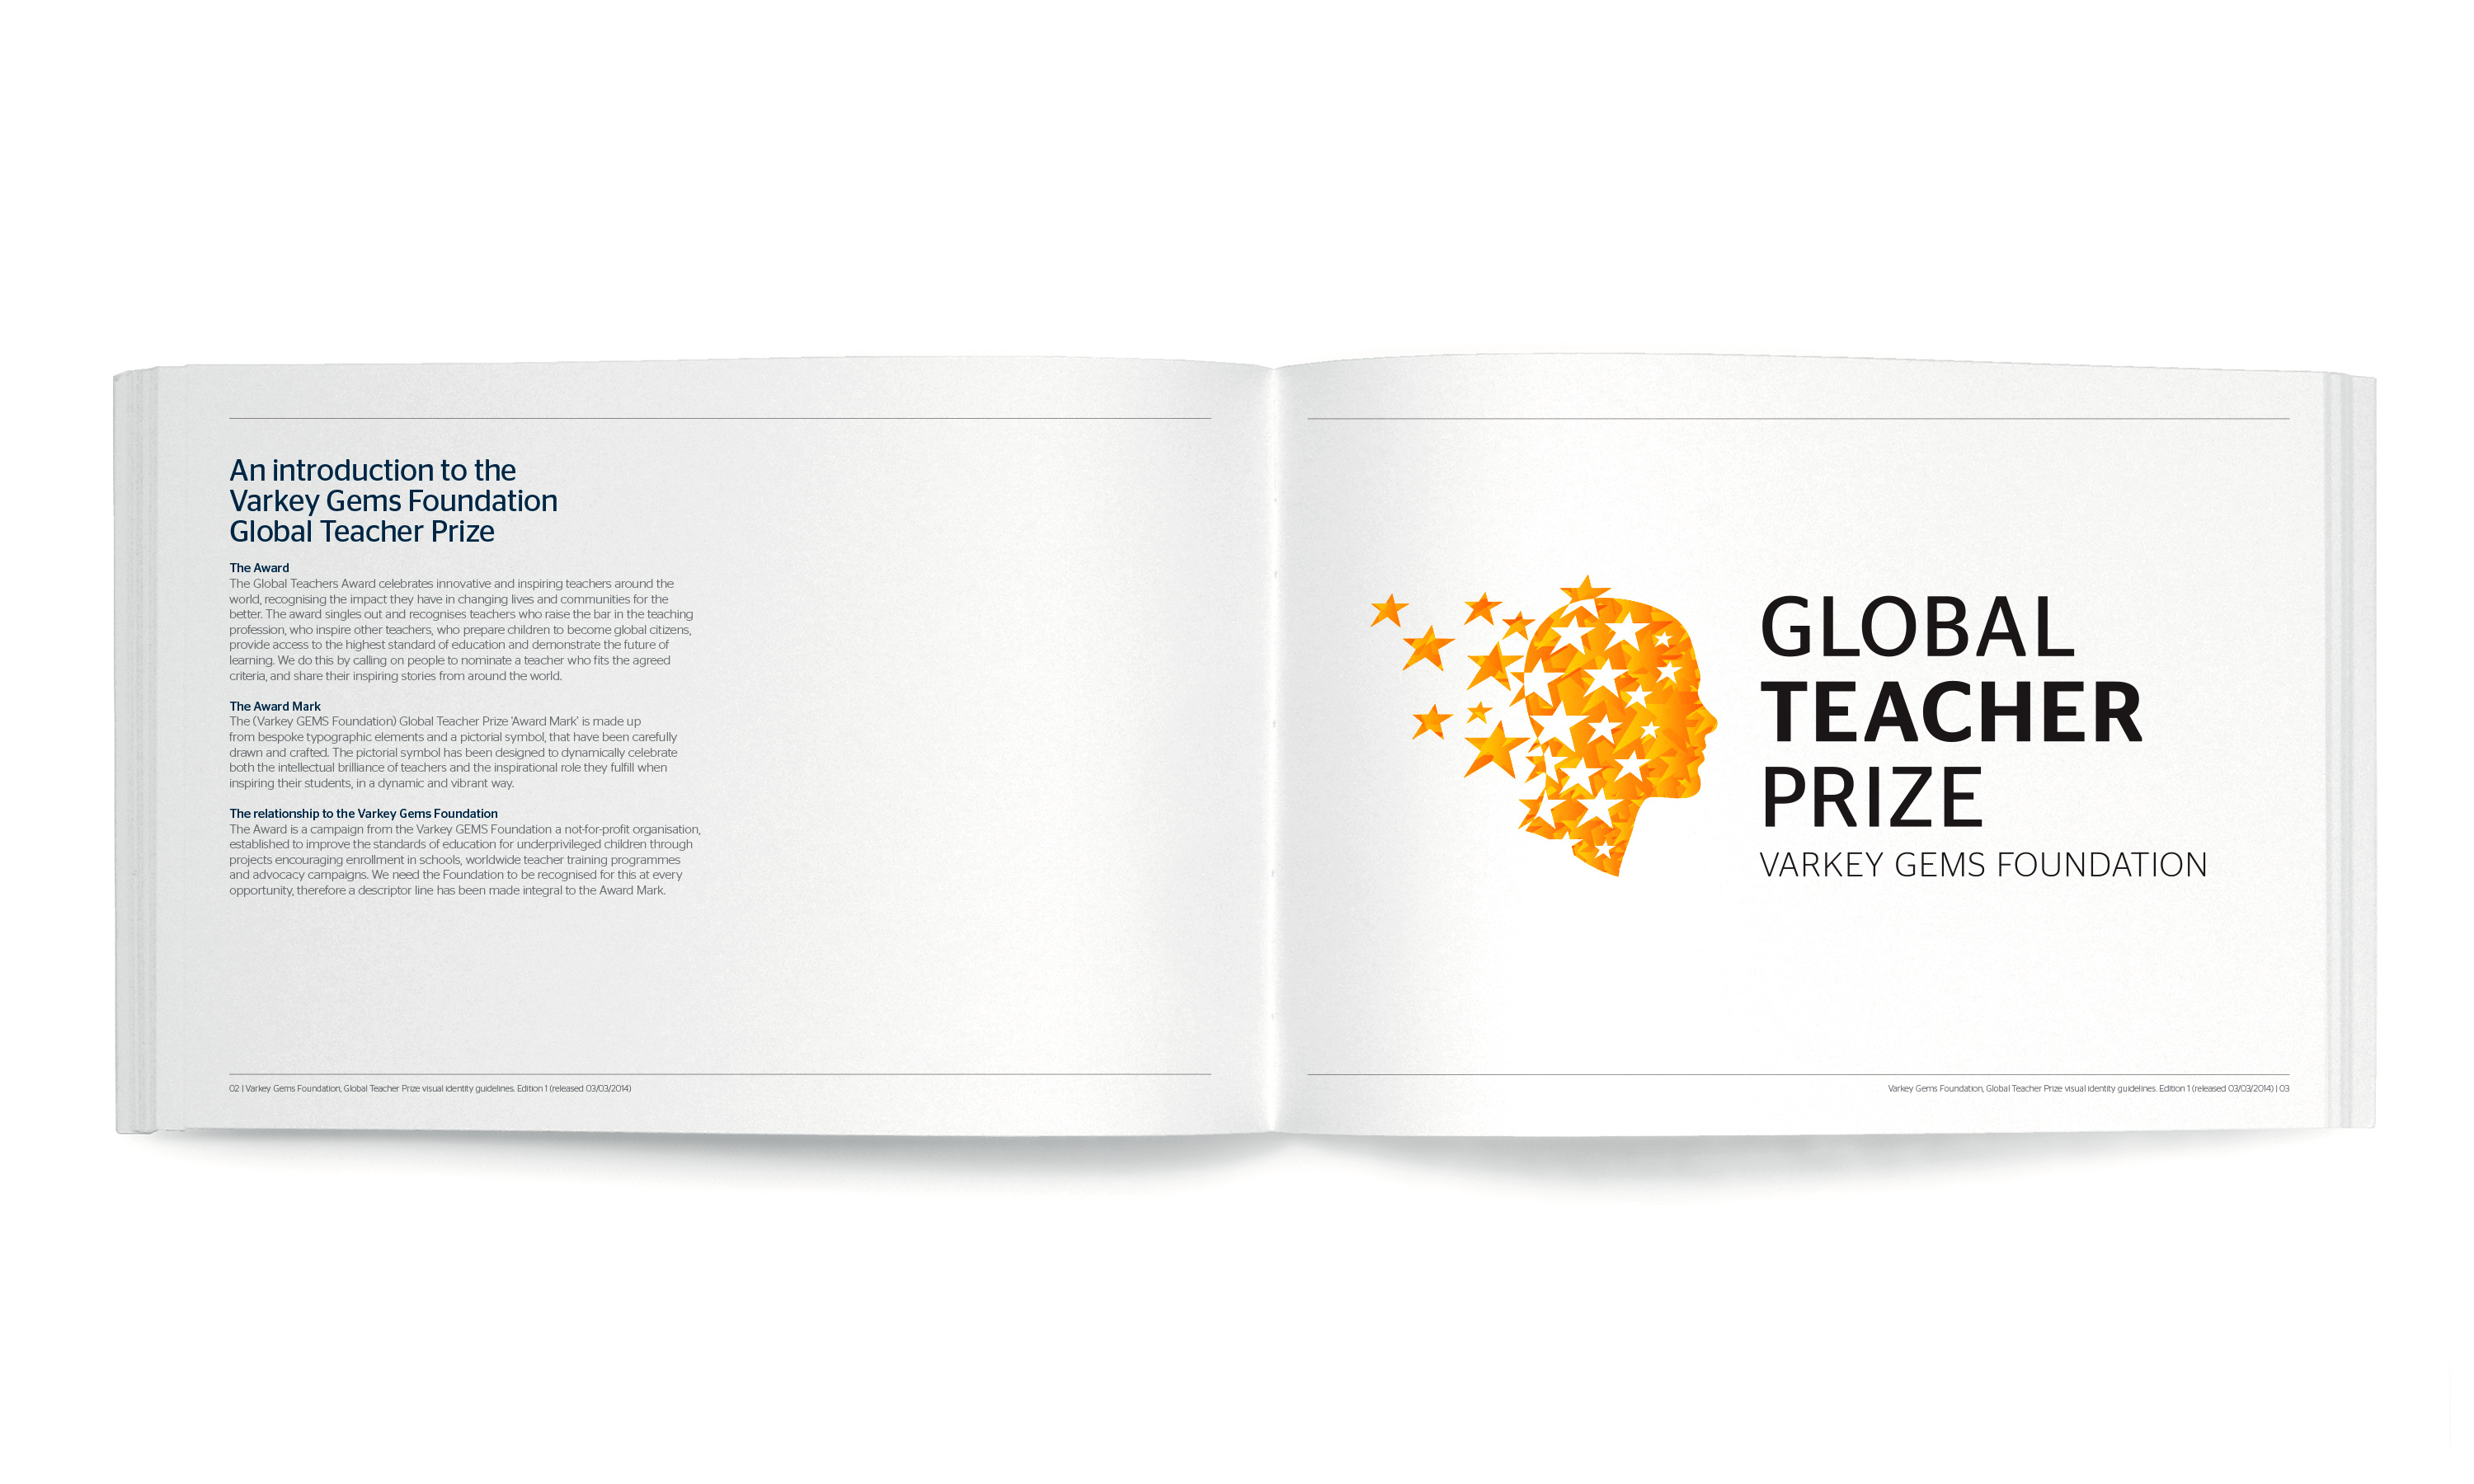 By Dana Robertson Creative Director and Founder of Neon. The Global Teacher Prize guidelines about the brand mark. Launching the 